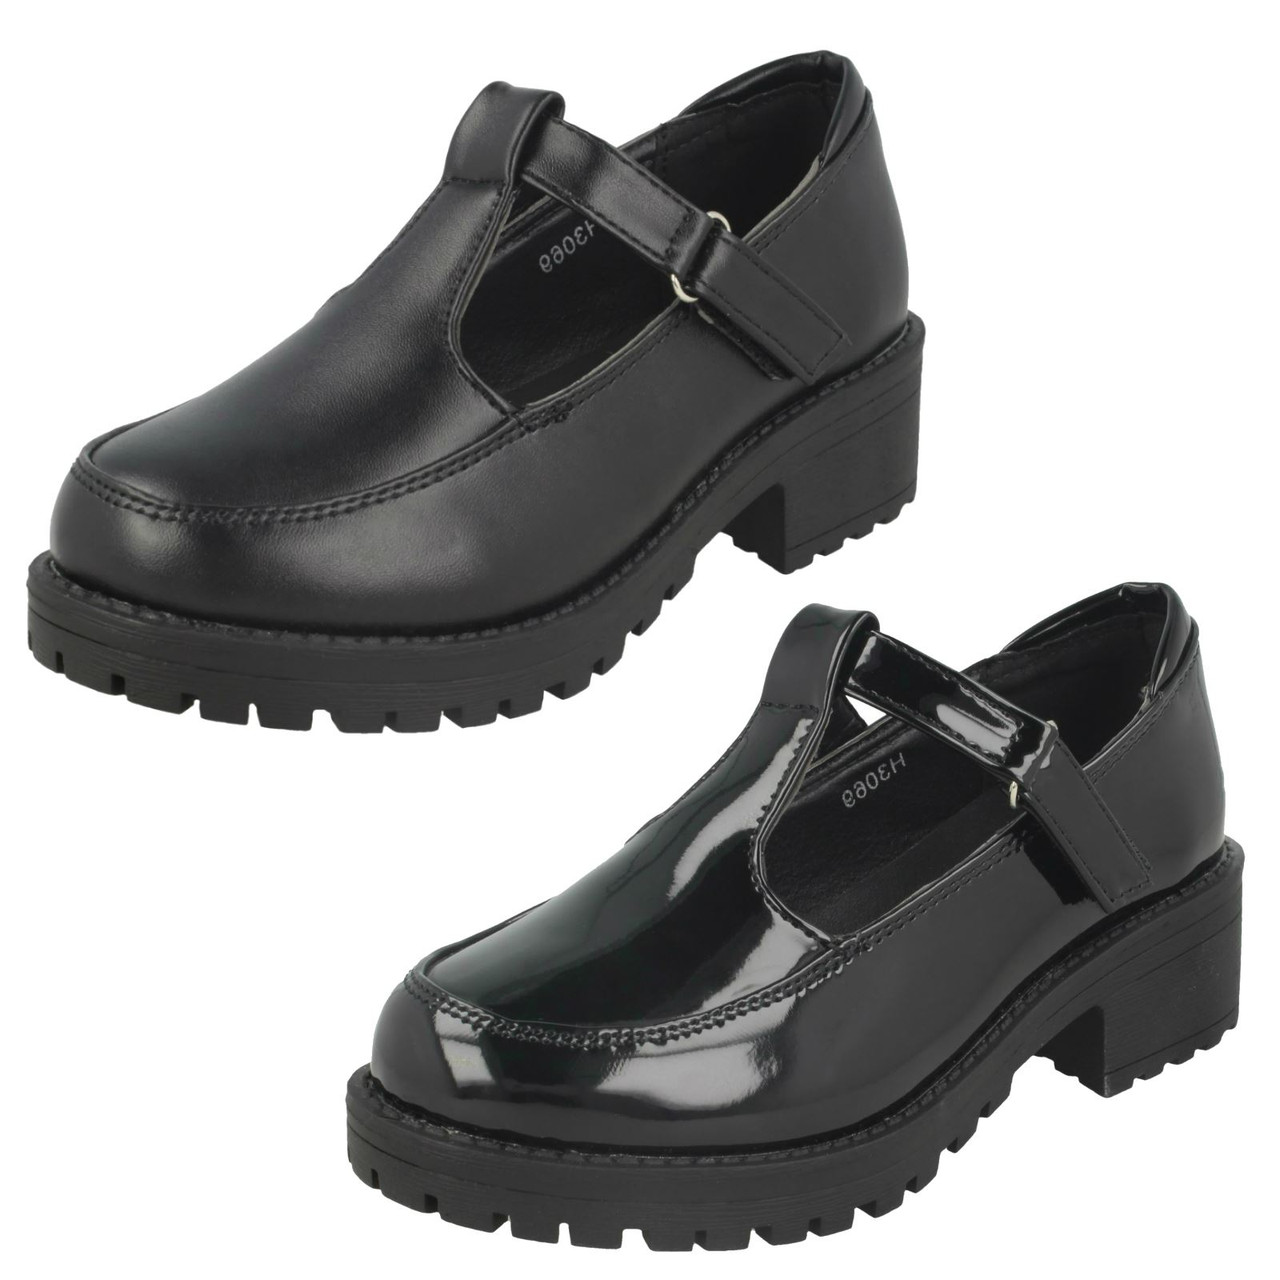 cool school shoes for boys